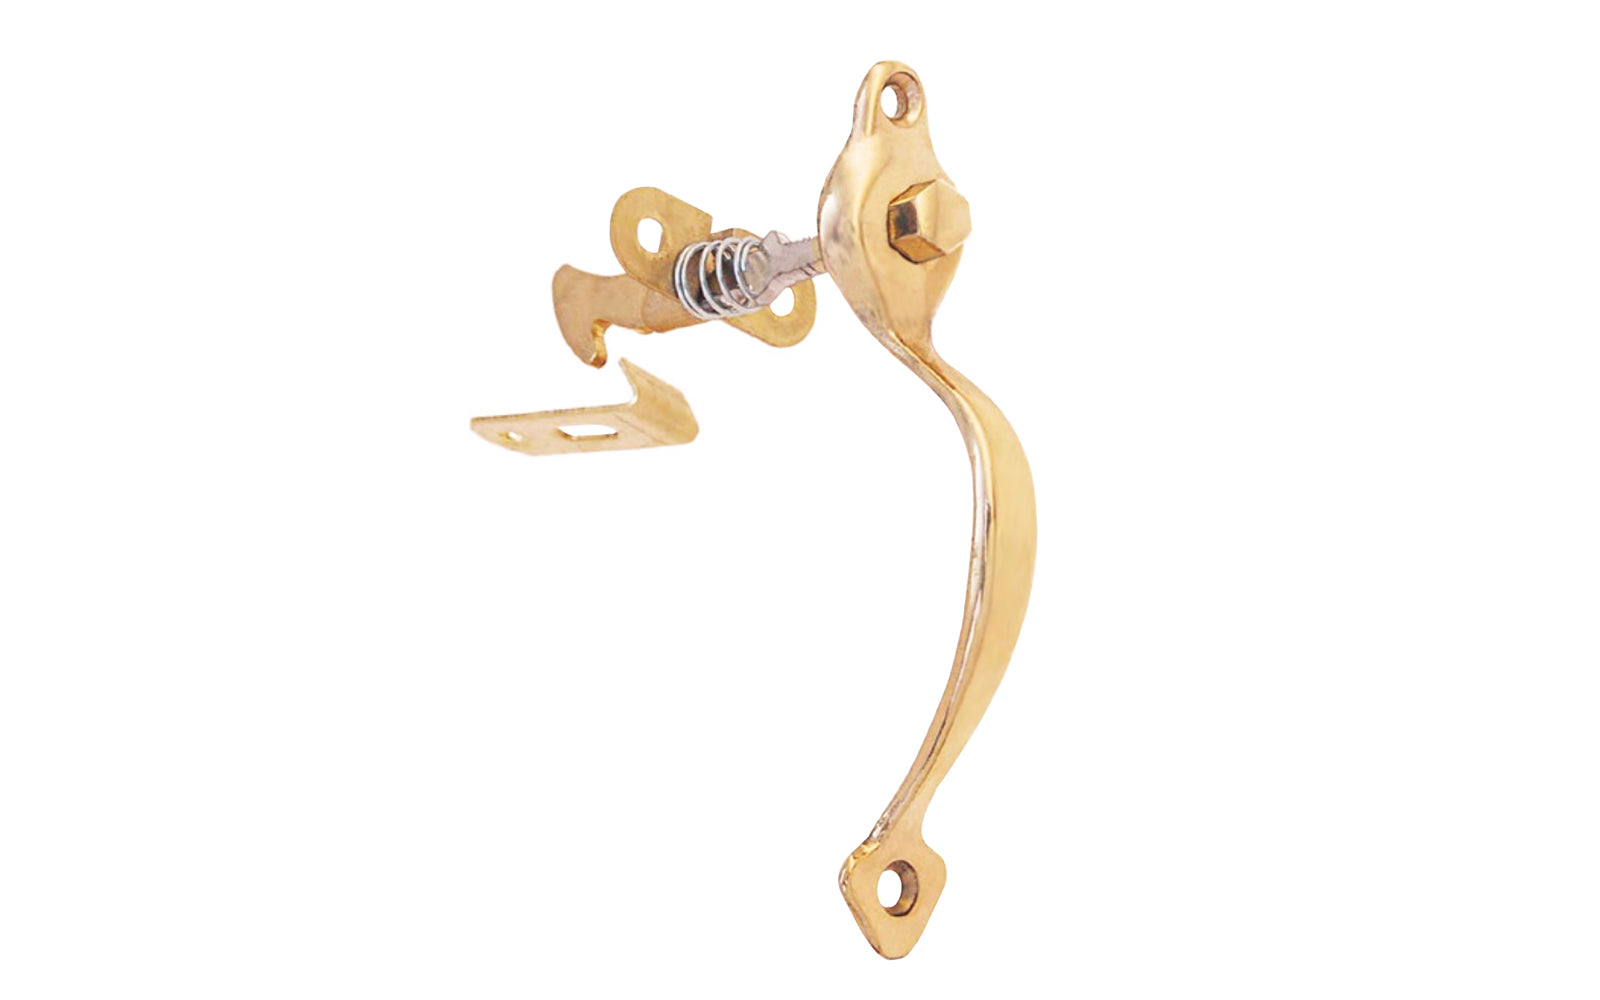 An unlacquered brass cabinet push-button latch handle pull. The spring action push button can be adjusted for different widths of cabinet doors. Designed for door thickness ranging from 1/2" to 1". Push Button Catch Handle Pull. Cabinet catch is designed in the late 19th century / early 20th century style of hardware.